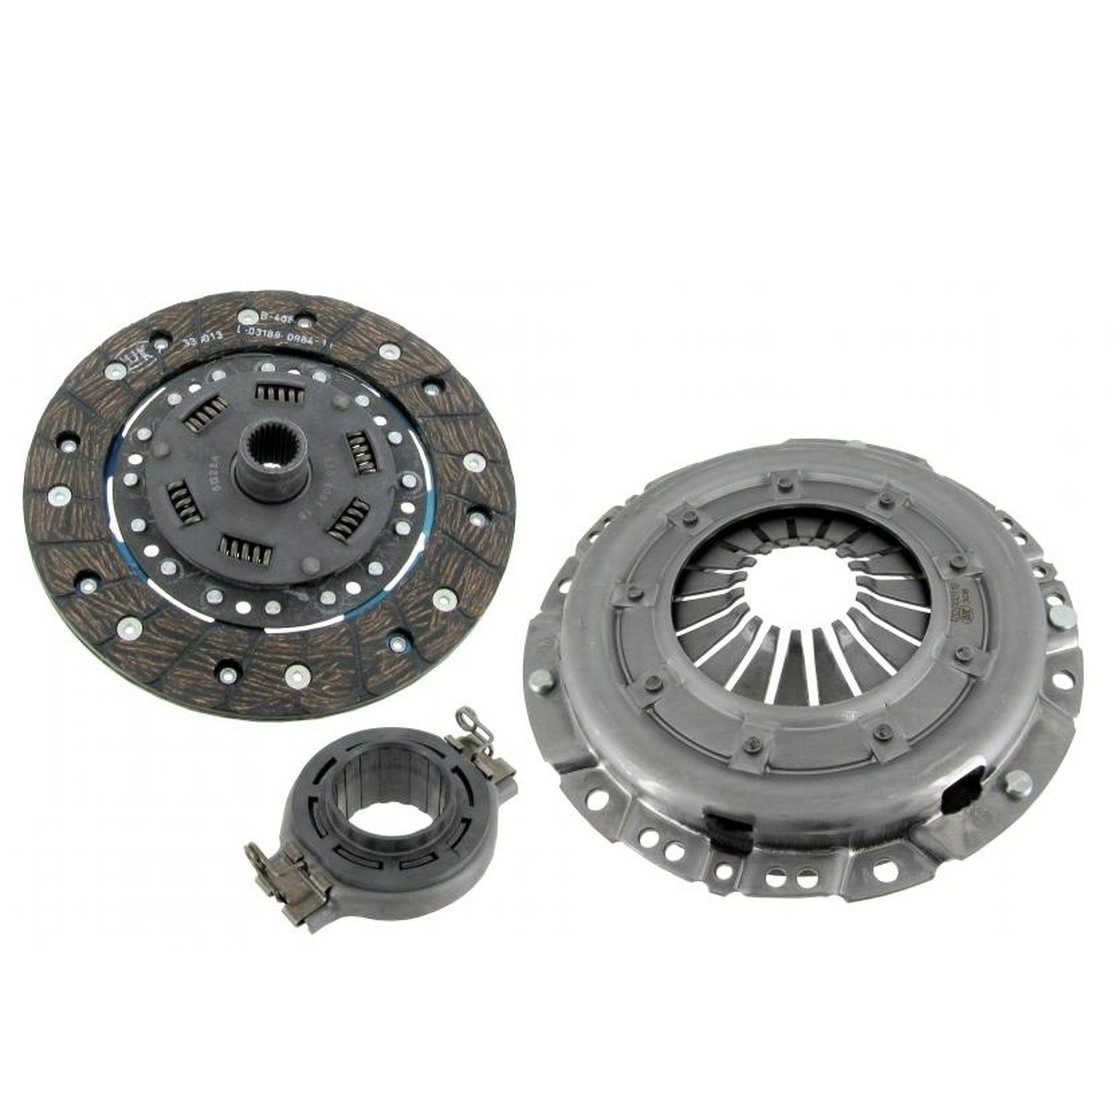 Clutch Kit 200mm (Three Parts) for 1600cc engine in VW Beetle and VW ...